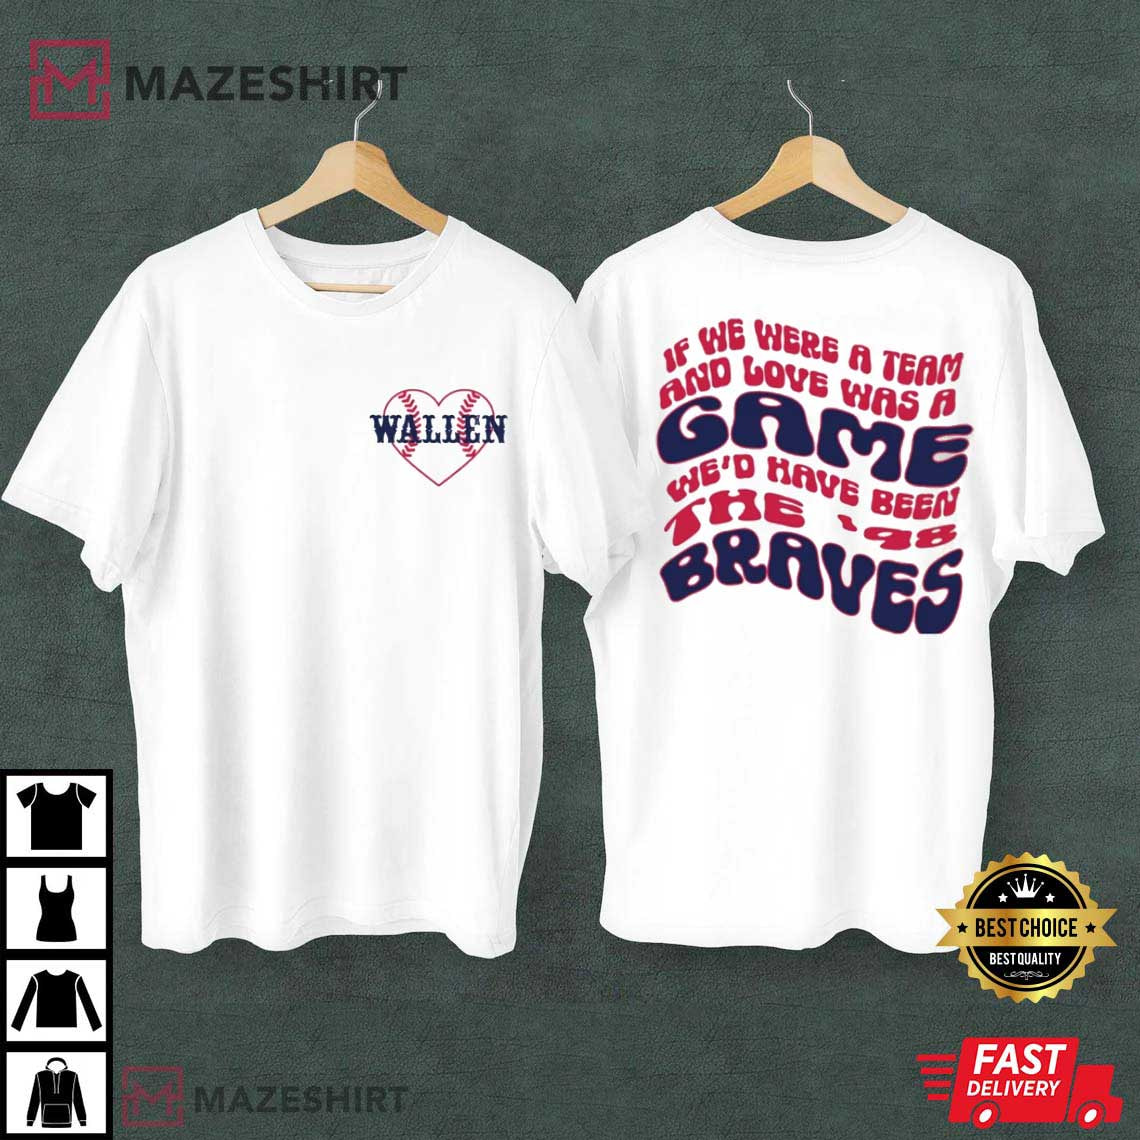 braves country t shirt